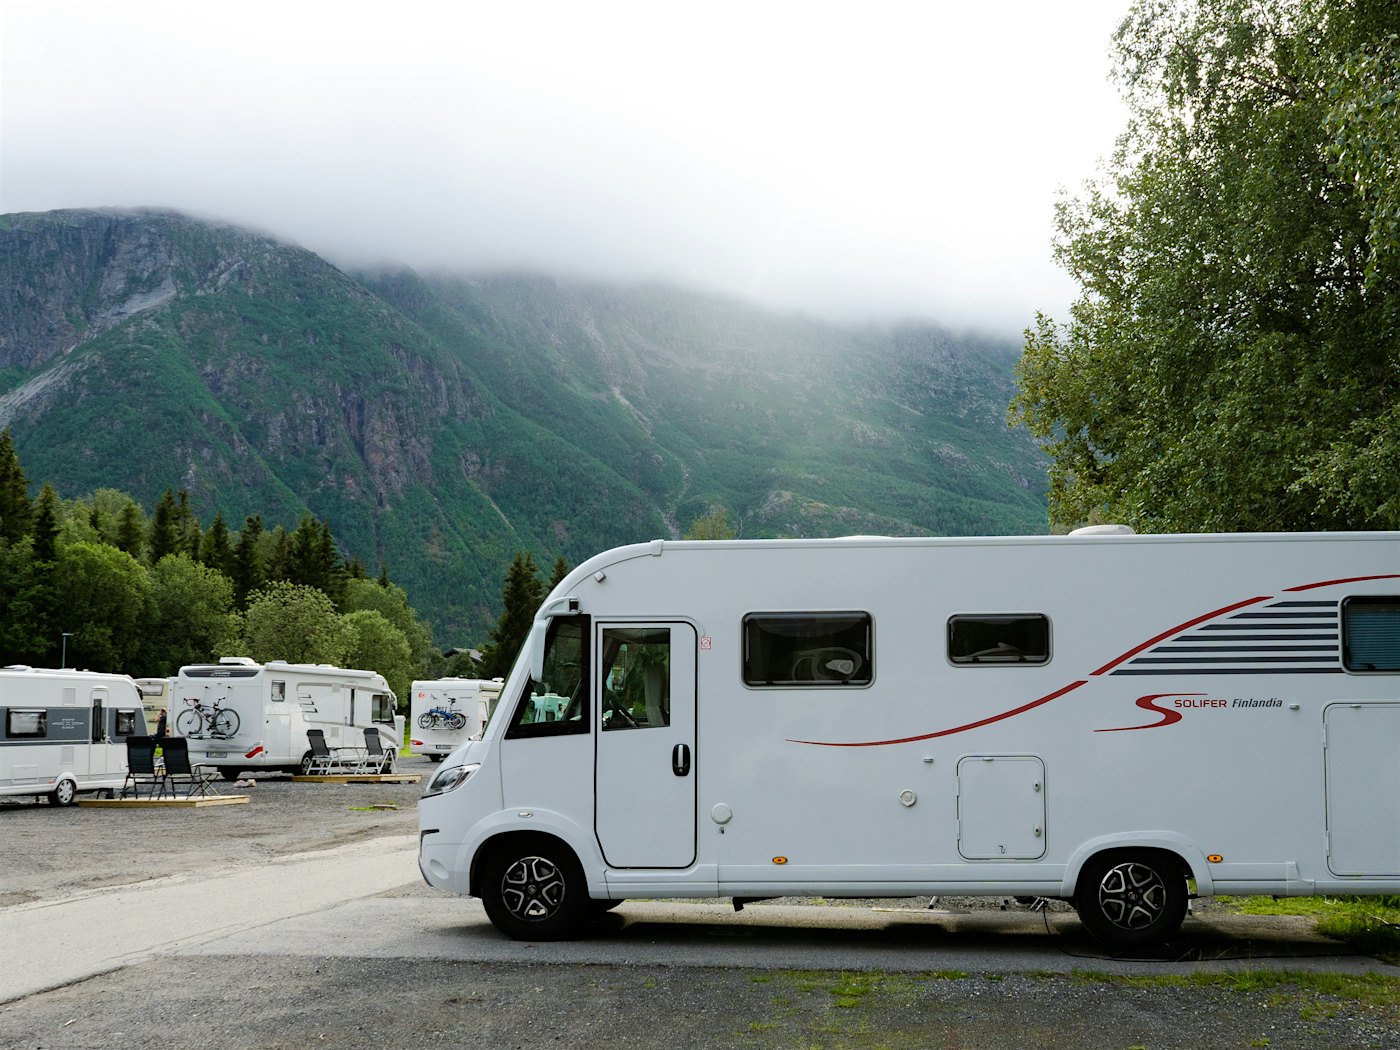 Motorhomes and caravans stand on a campsite, with high mountains in the background. Photo